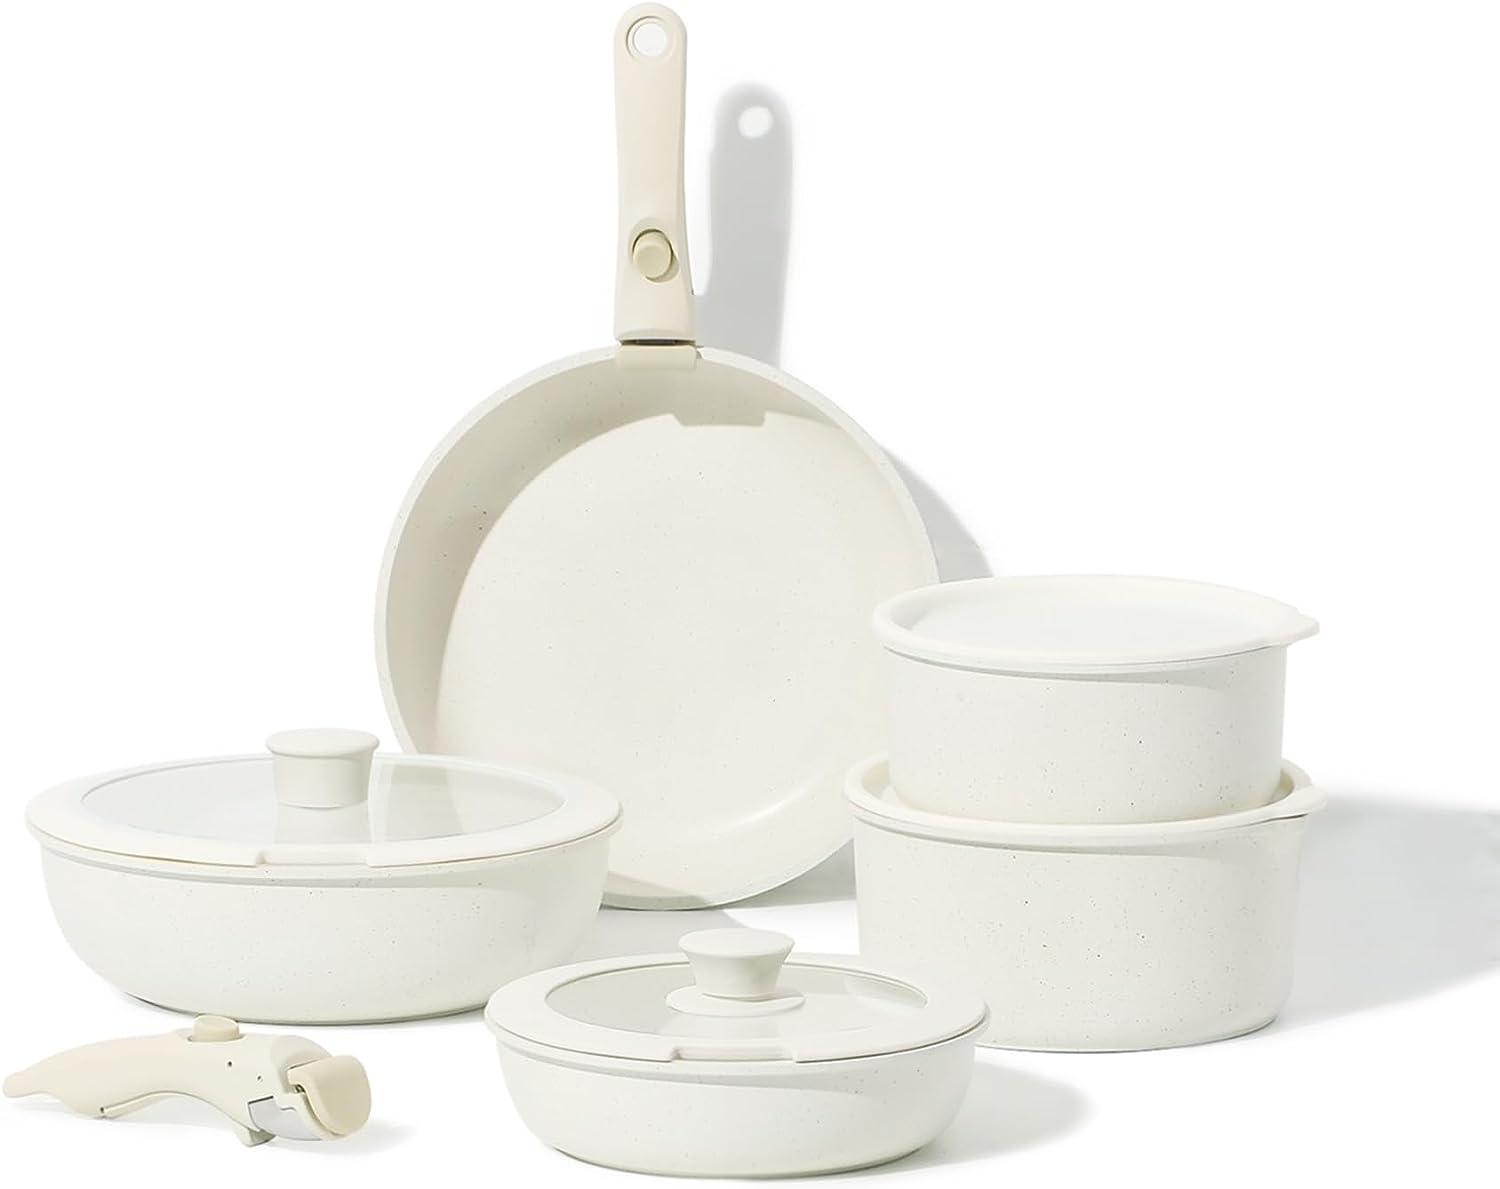 Cooking set in a cream white color